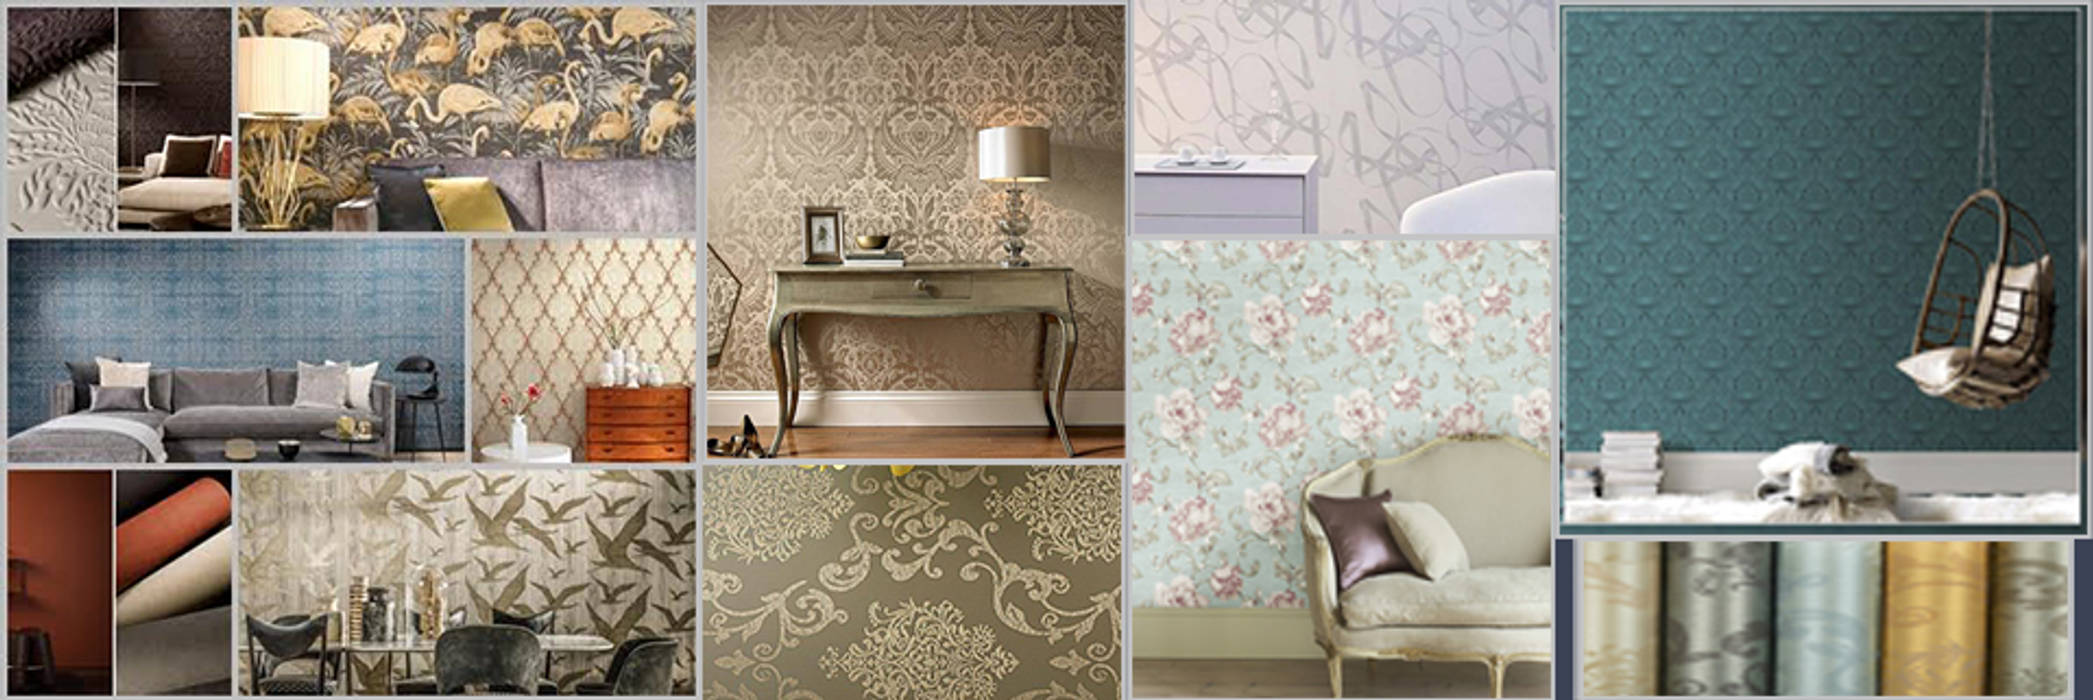 Wallpaper Removal Services, Shotcount Paper Hangers Shotcount Paper Hangers Powierzchnie handlowe Powierzchnie handlowe